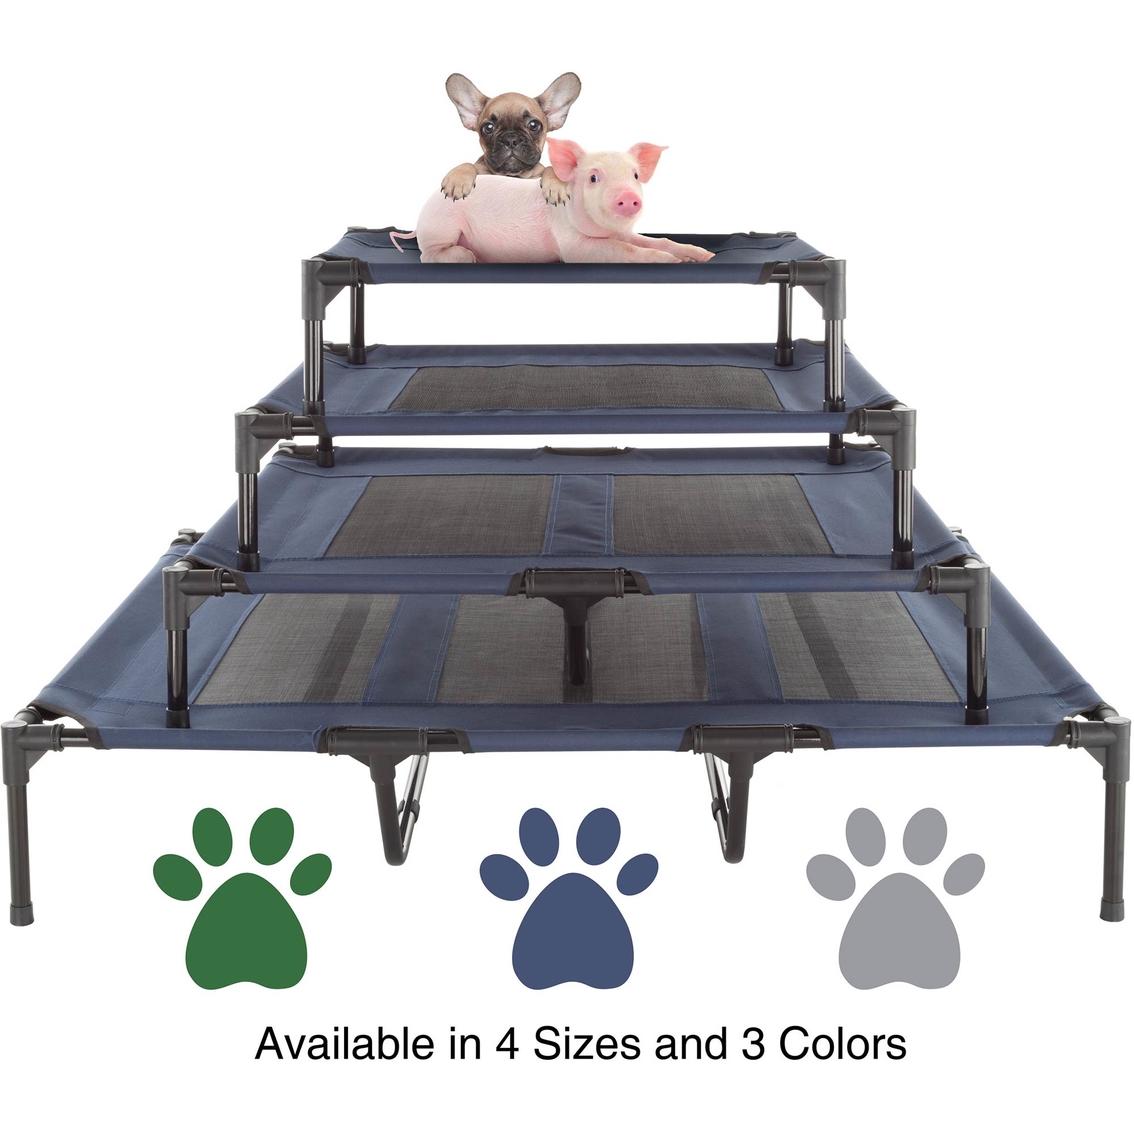 Petmaker Elevated Pet Bed with Mesh Center Panel - Image 7 of 8